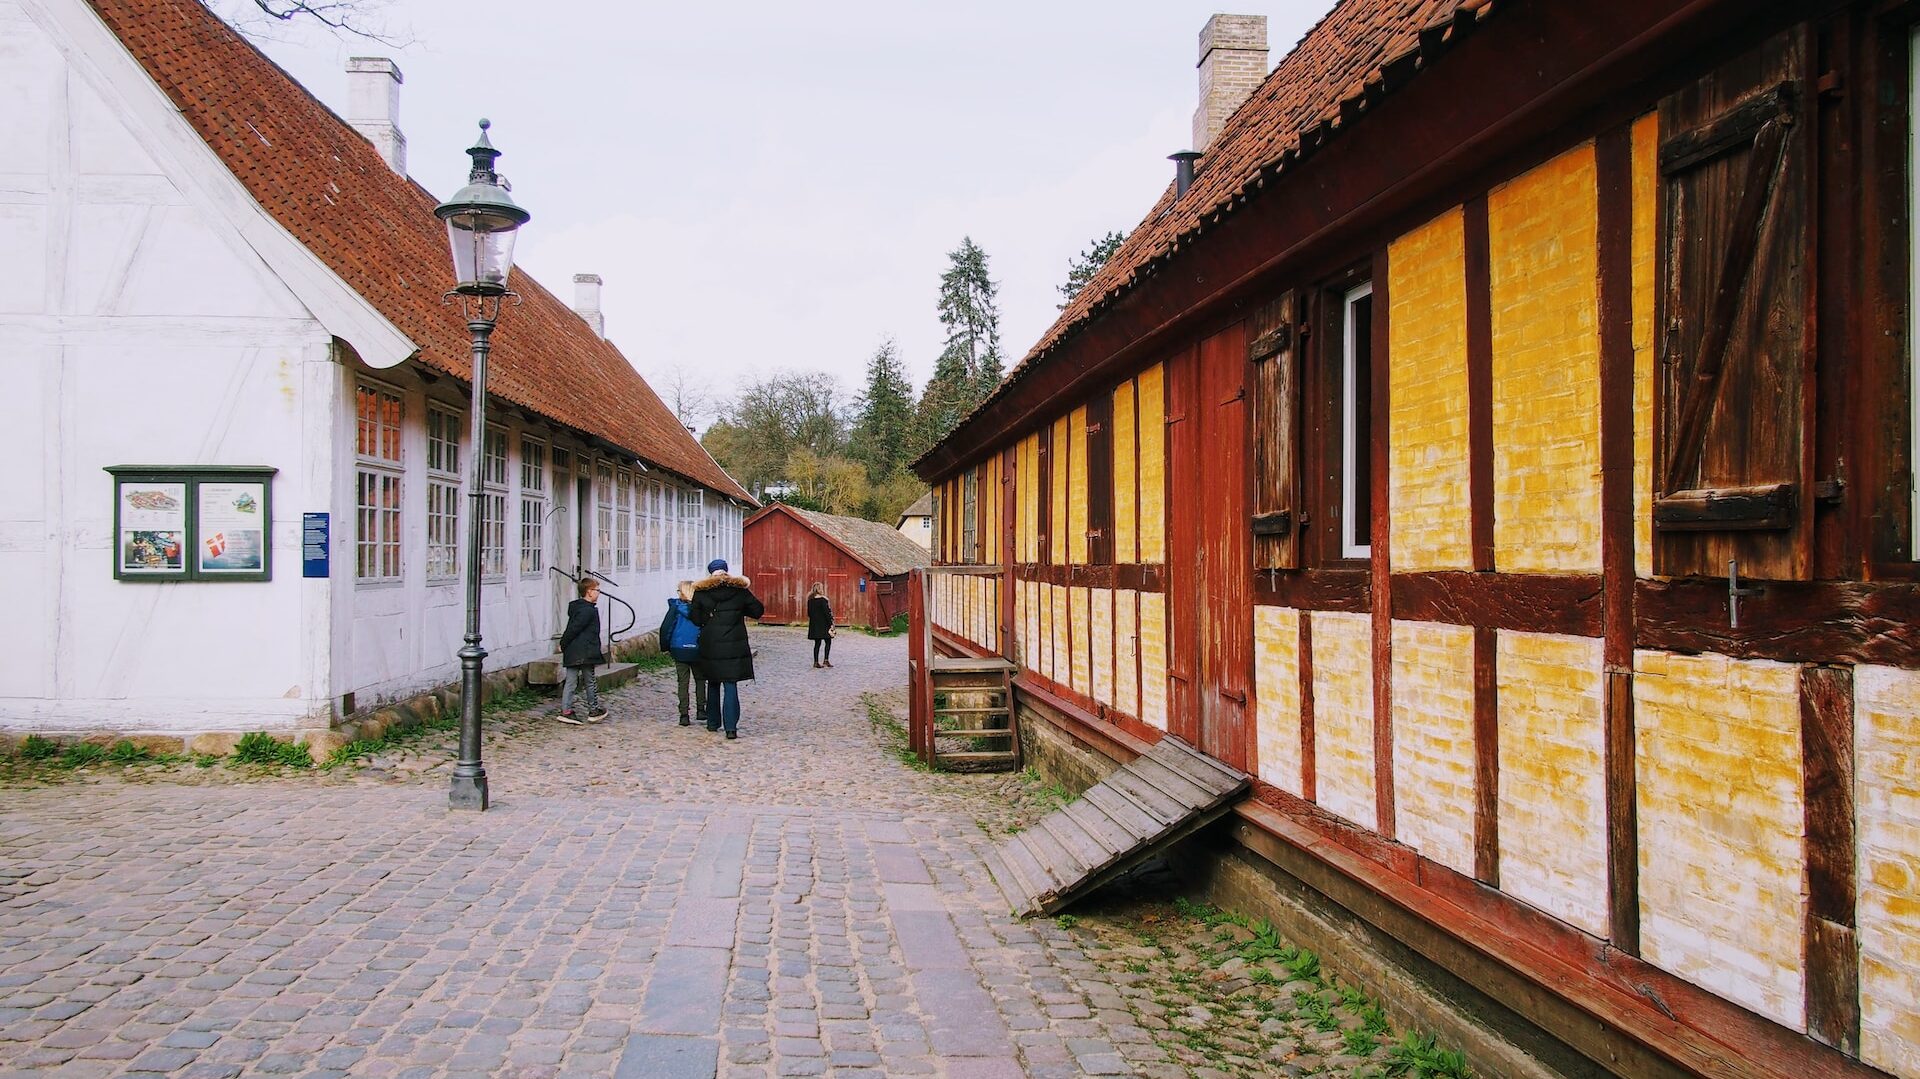 Visiting Den Gamle By is an epic thing to do in Aarhus.